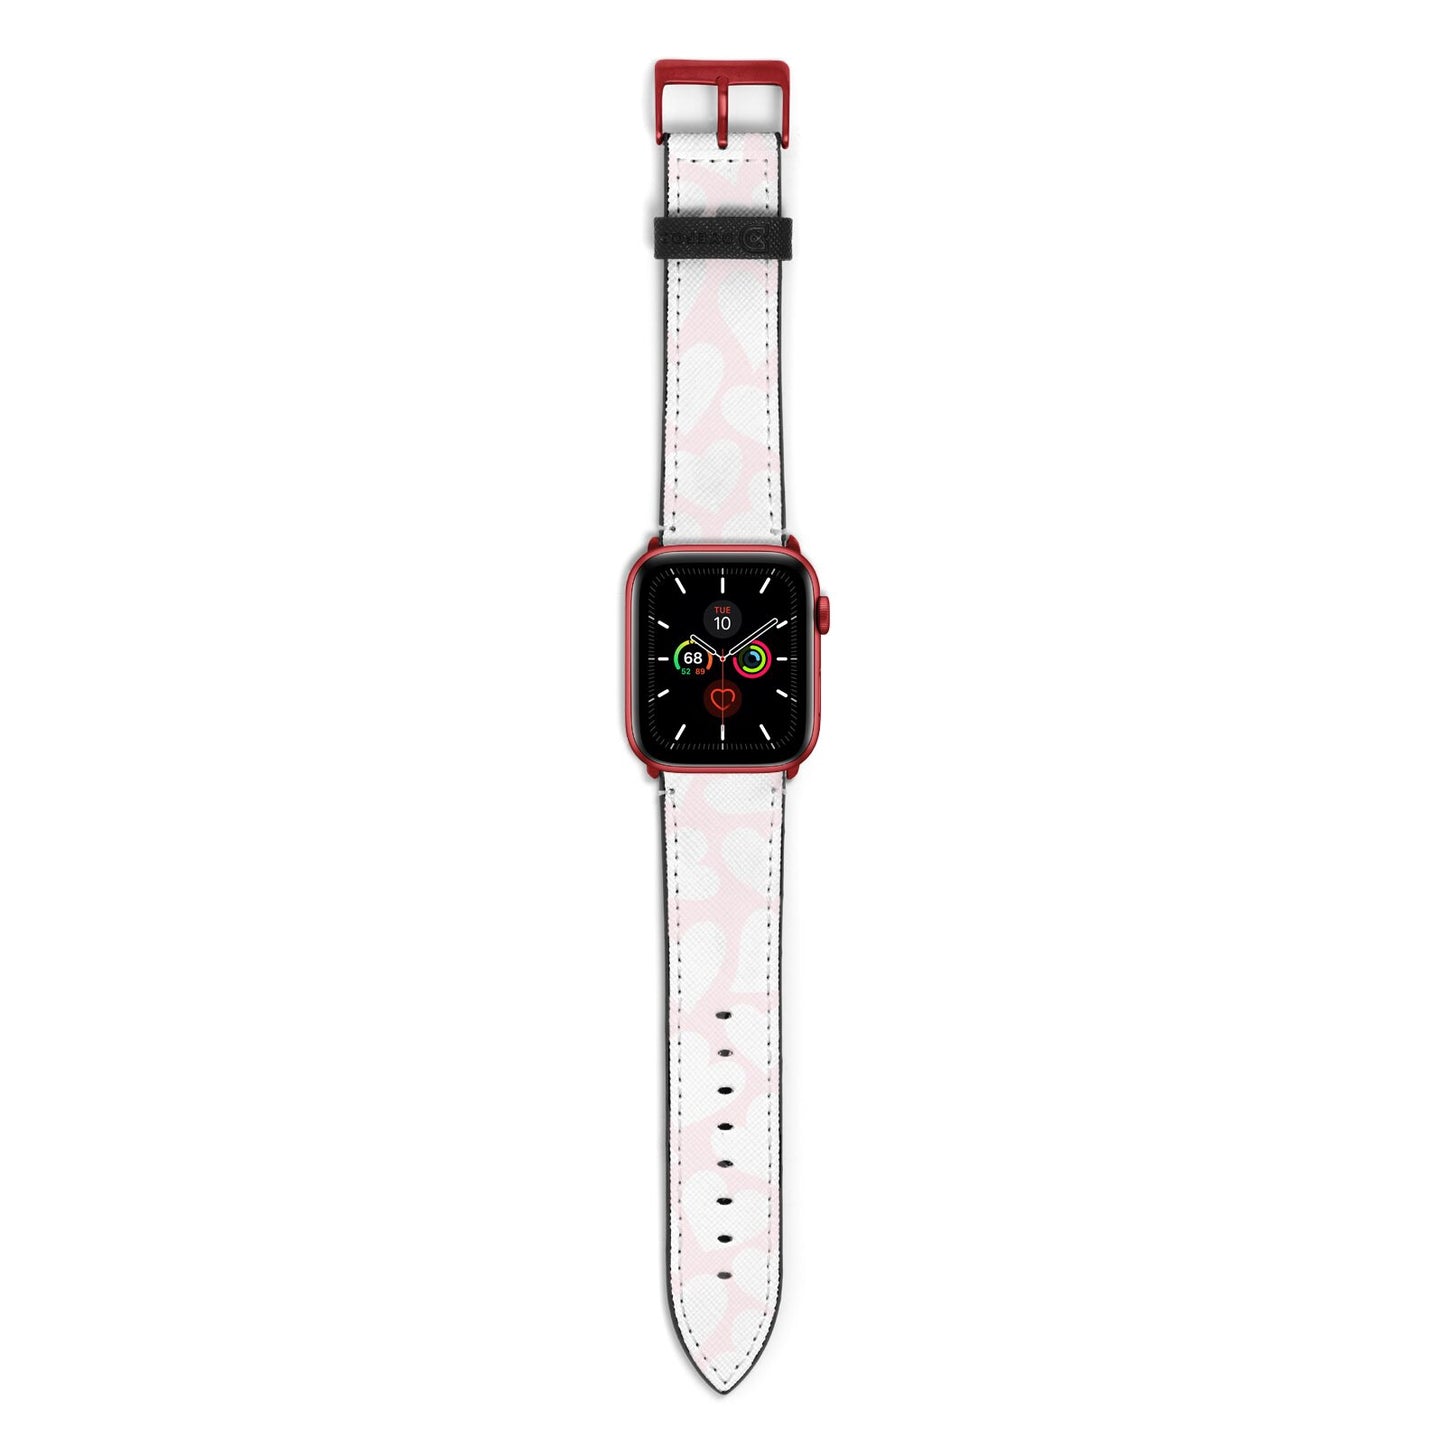 Heart Apple Watch Strap with Red Hardware